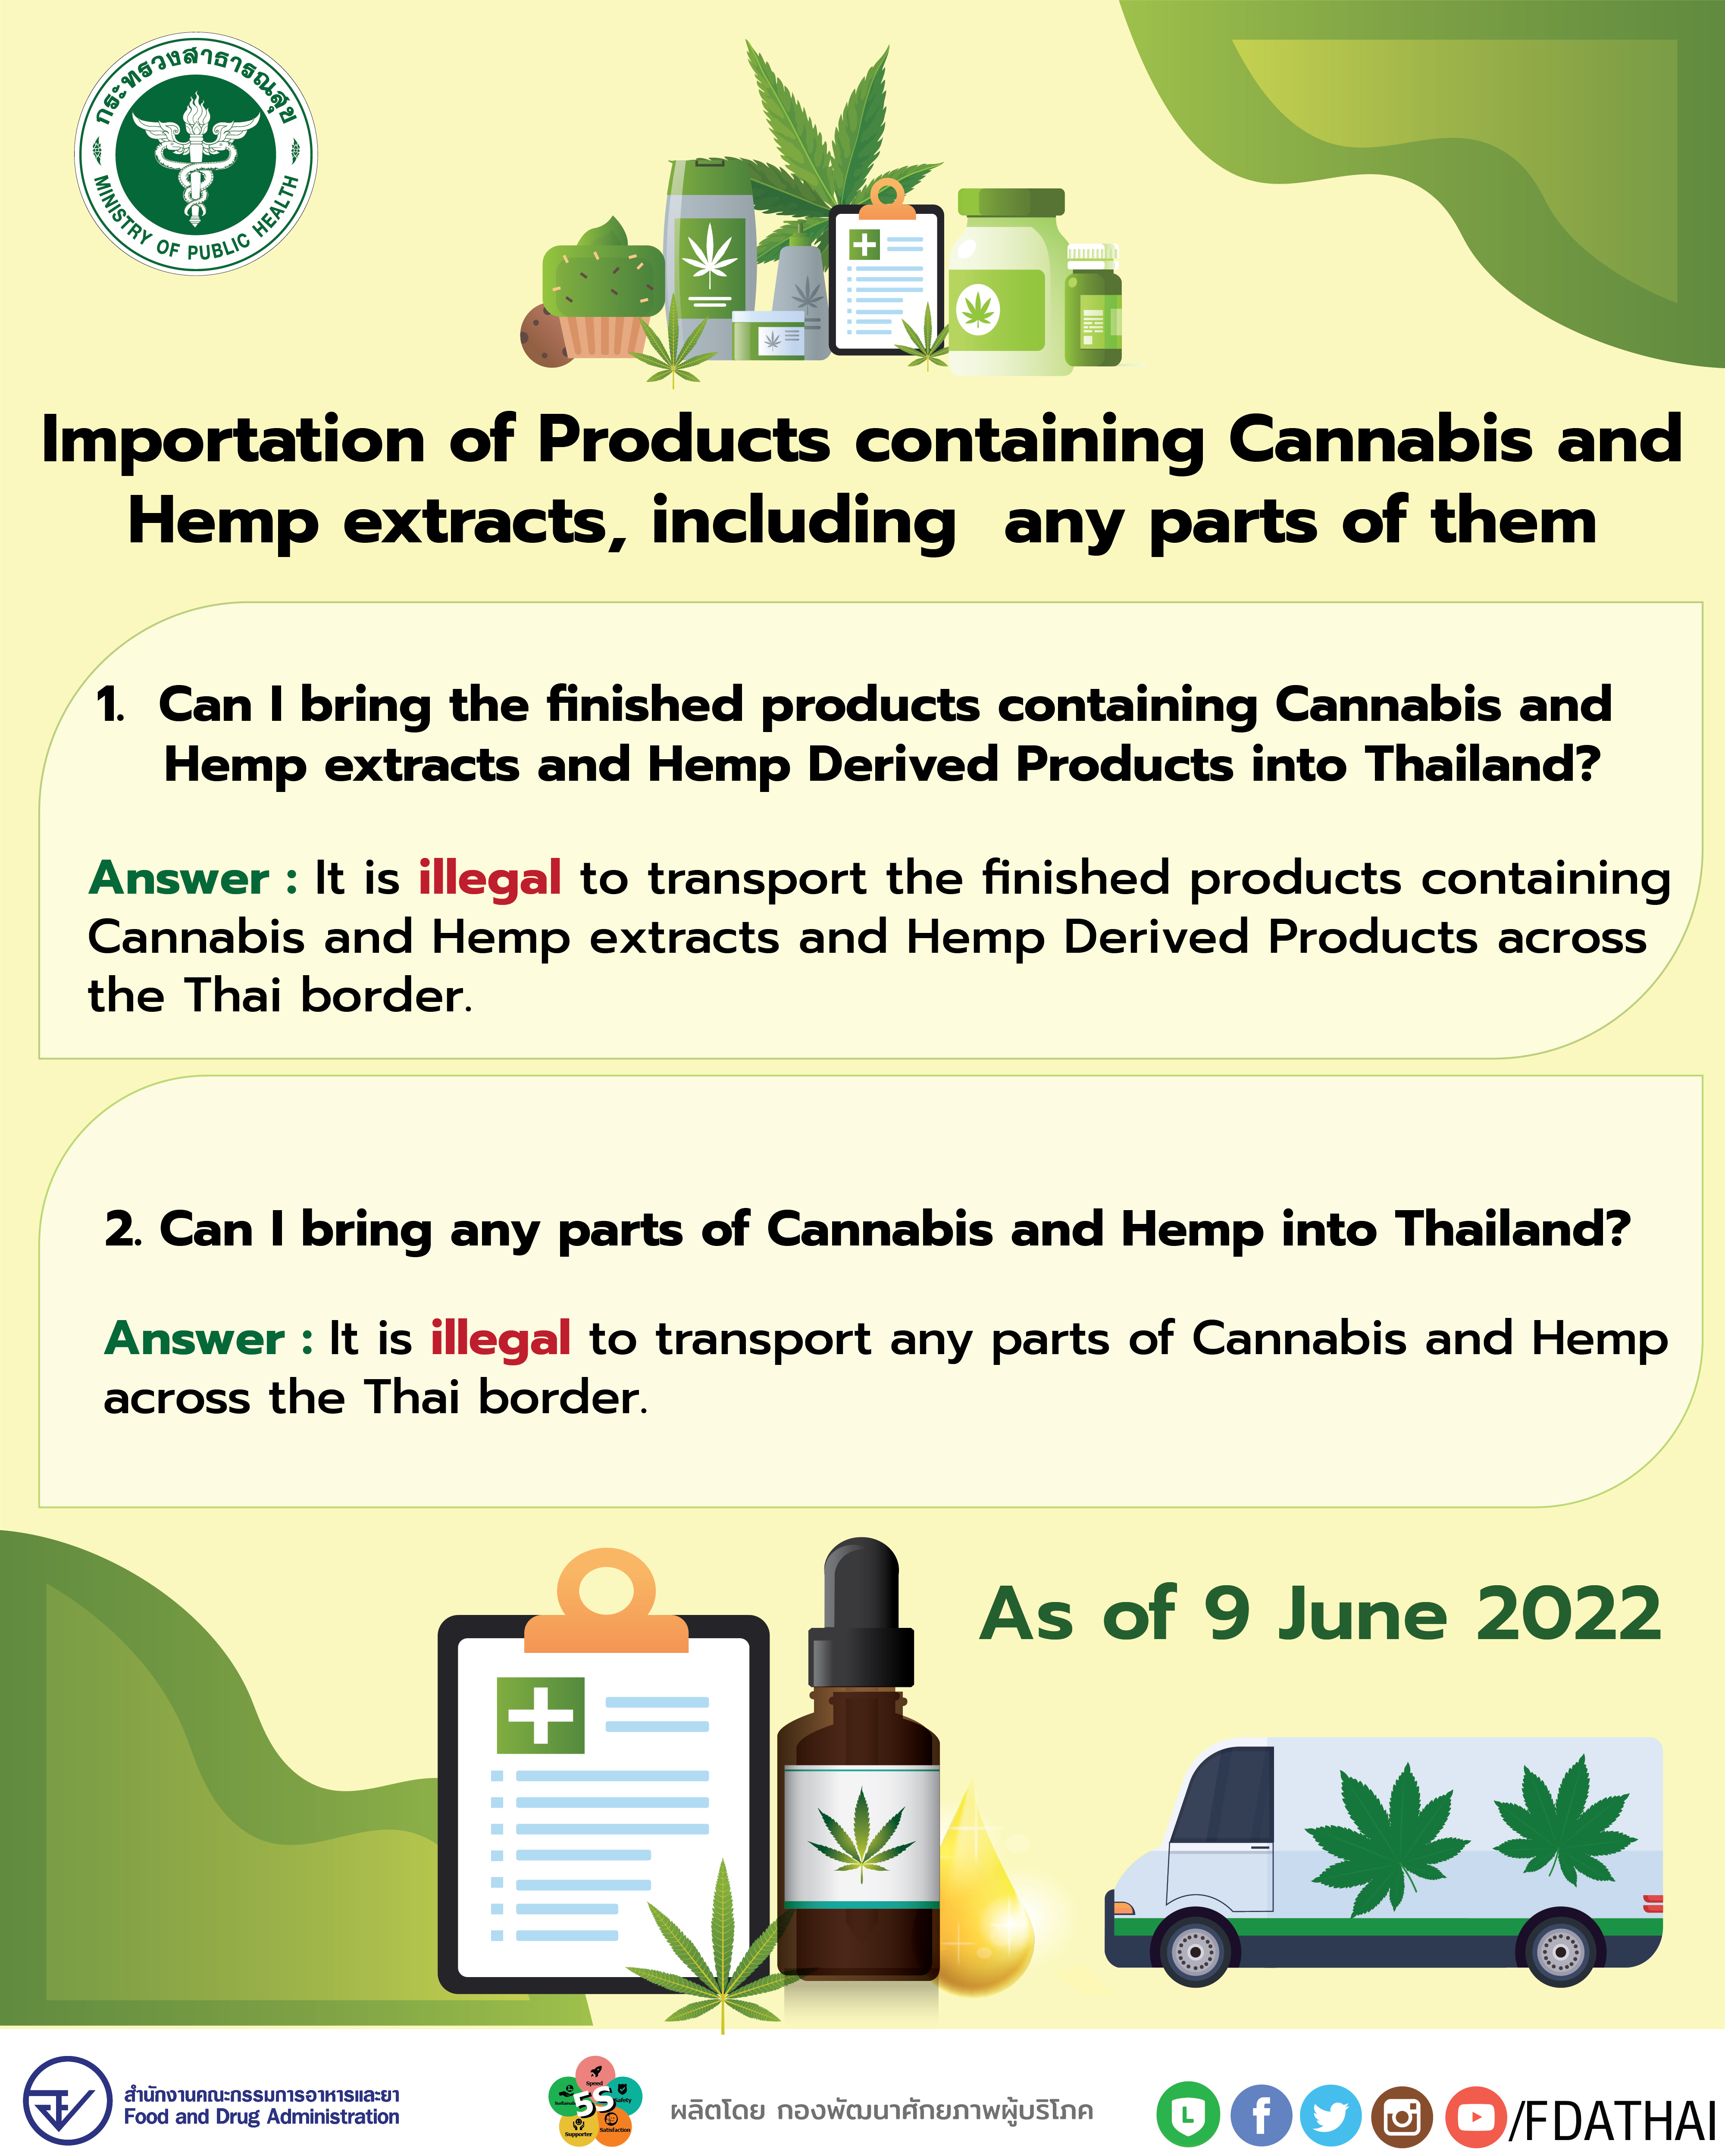 Importation of Products containg Cannabis and Hemp.jpg